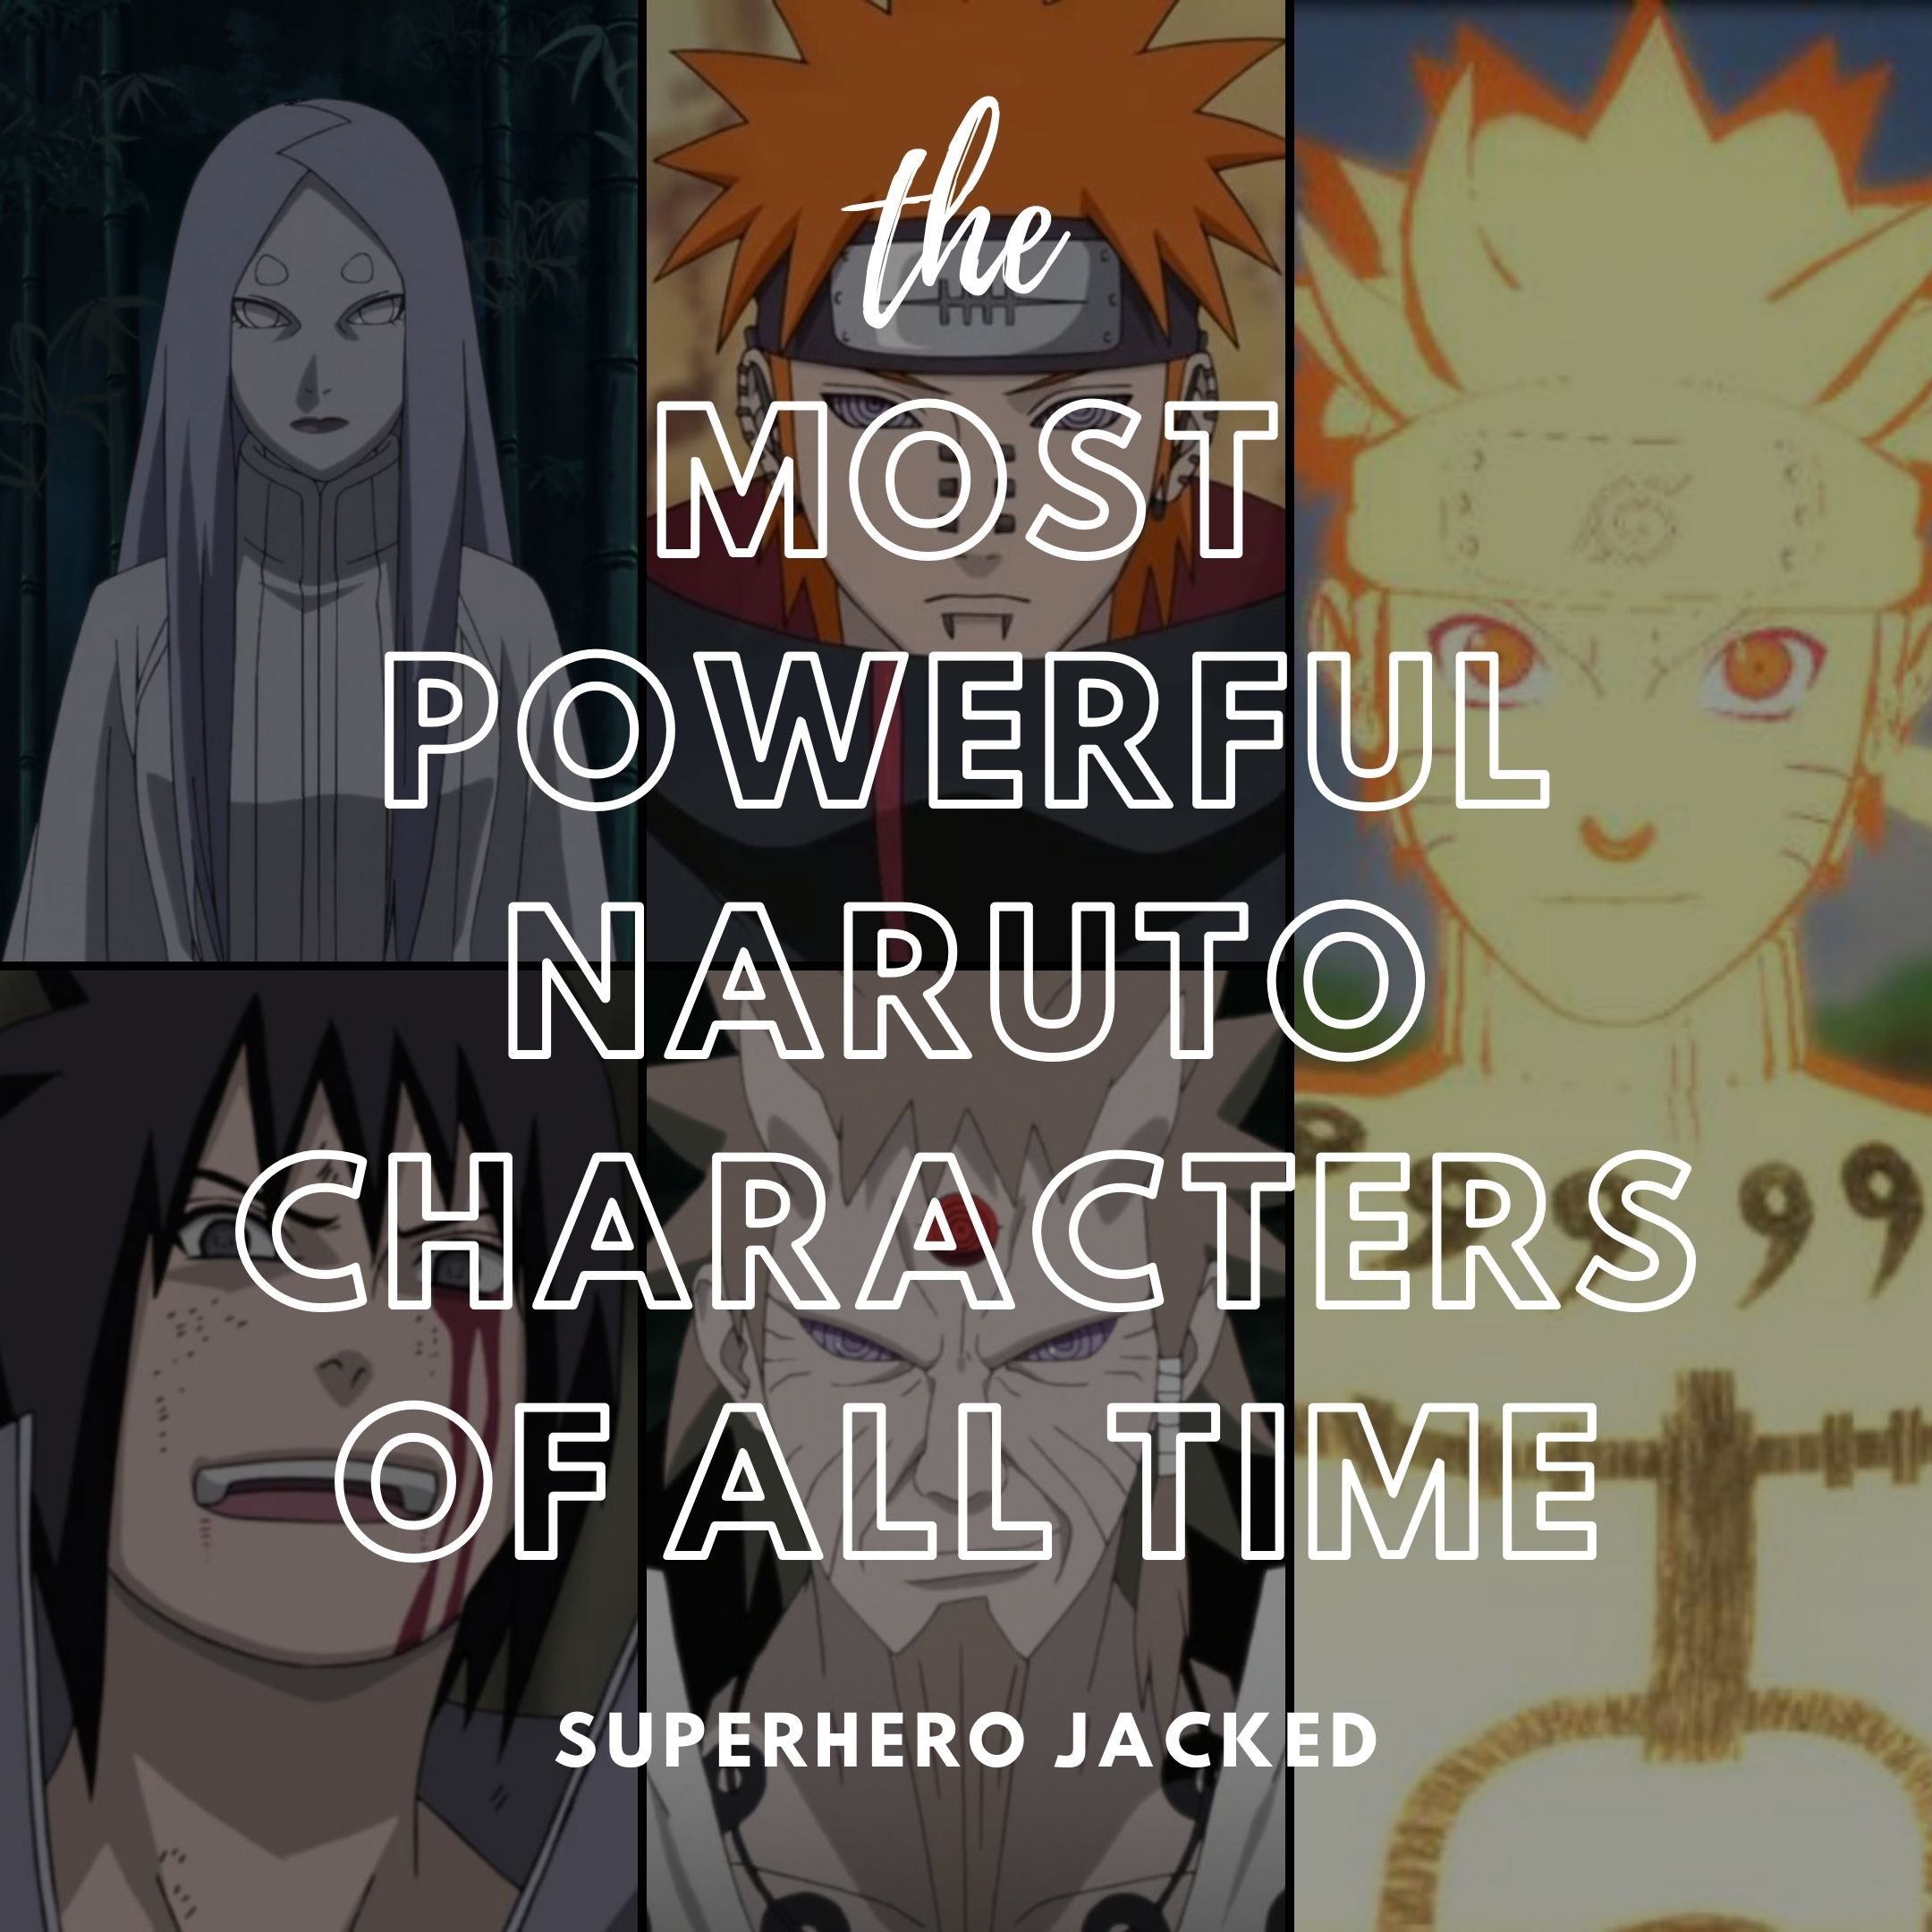 The Most Powerful Naruto Characters of All Time – Superhero Jacked